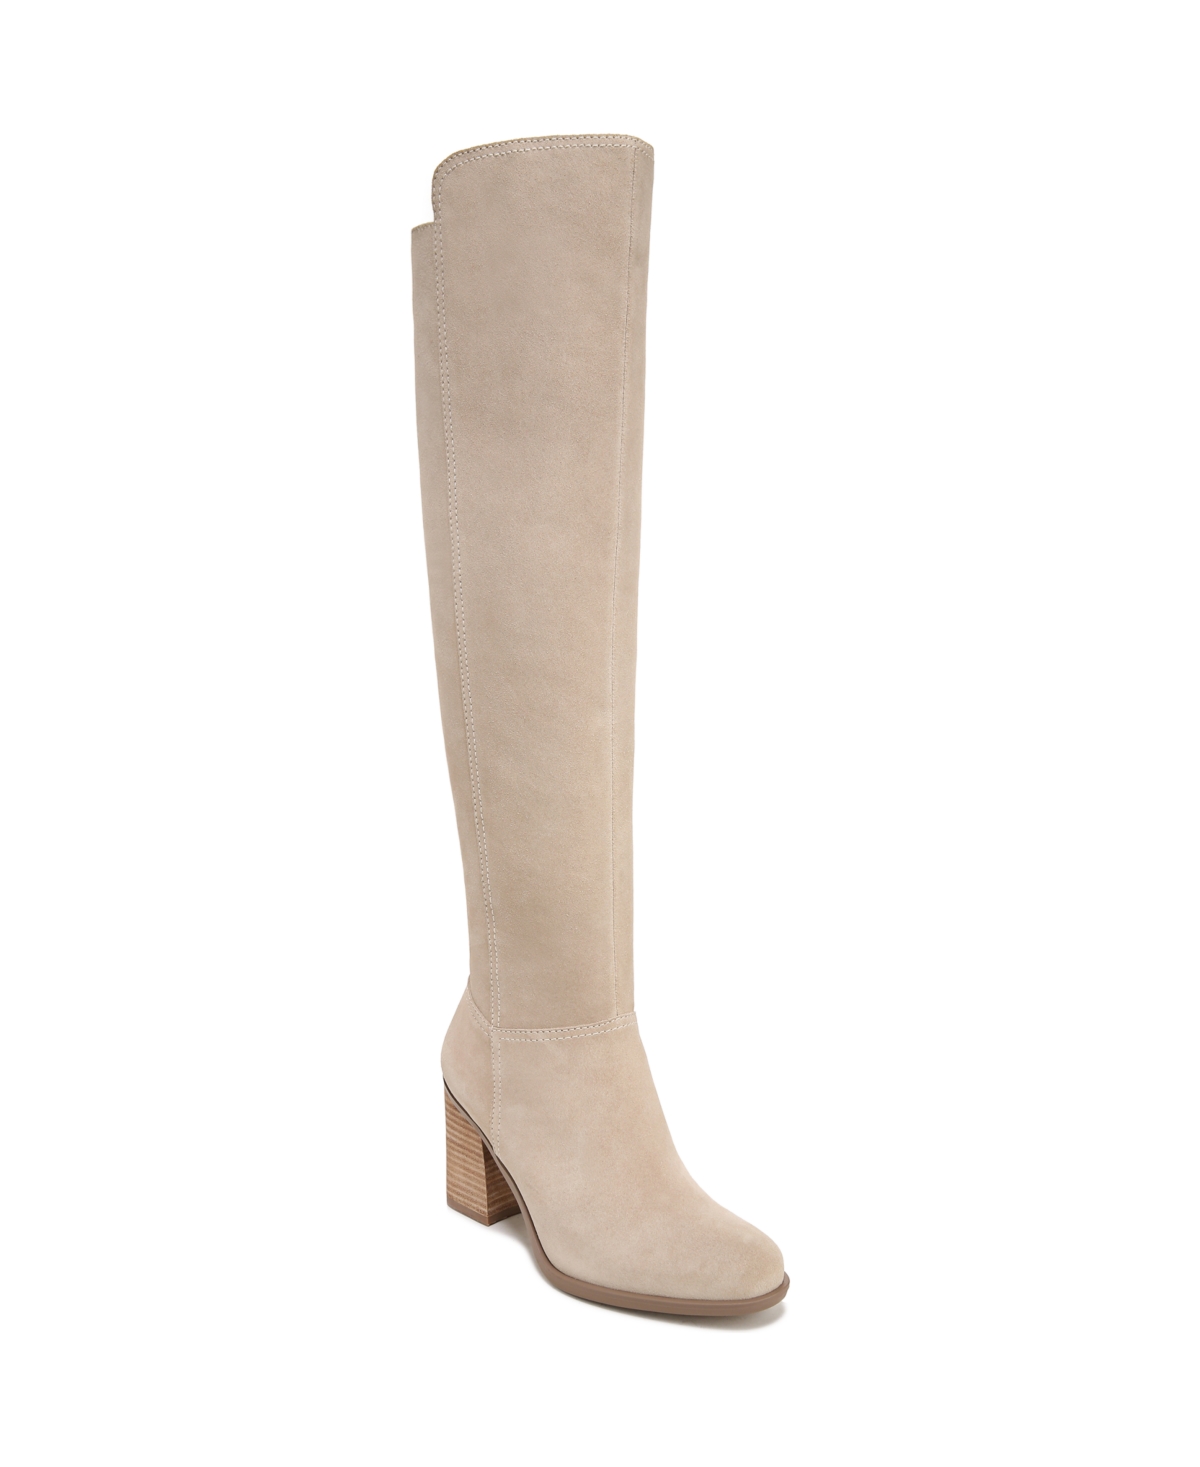 NATURALIZER KYRIE WATER-RESISTANT OVER-THE-KNEE BOOTS